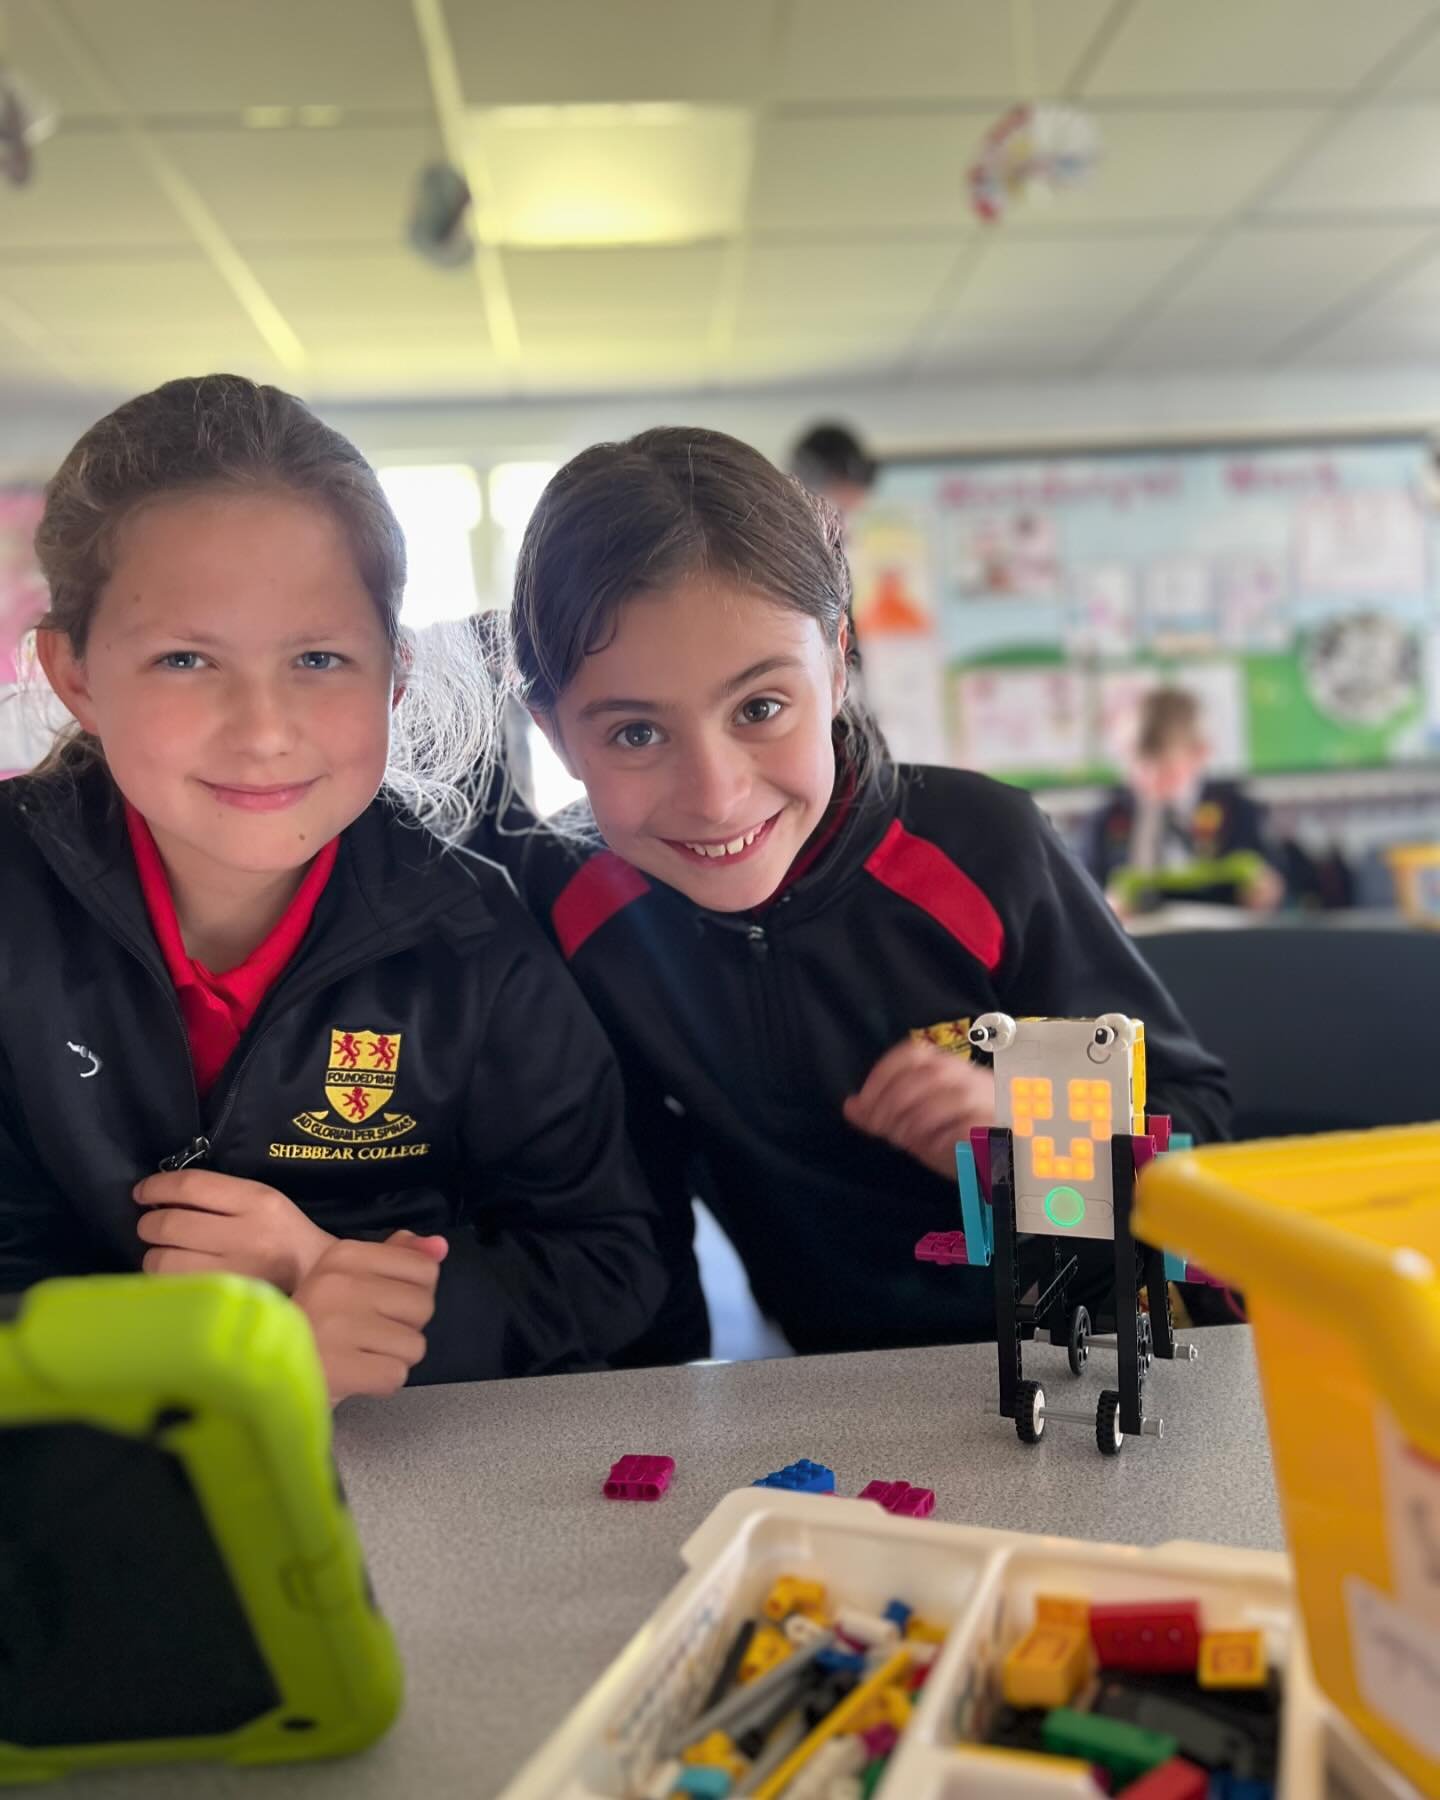 Great to be back in the classroom @shebbearcollege yesterday with a full day of @legoeducation fun! 

We worked on the concept of Input and Output with our youngest pupils; looked at the elements of habitats and created amazing Giraffes (as a science